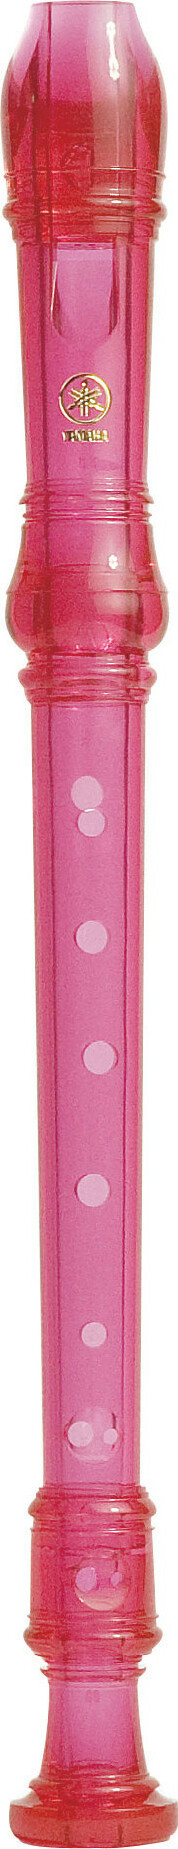 Yamaha Yrs20bp A Bec Scolaire Rose Translucide - School recorder - Main picture